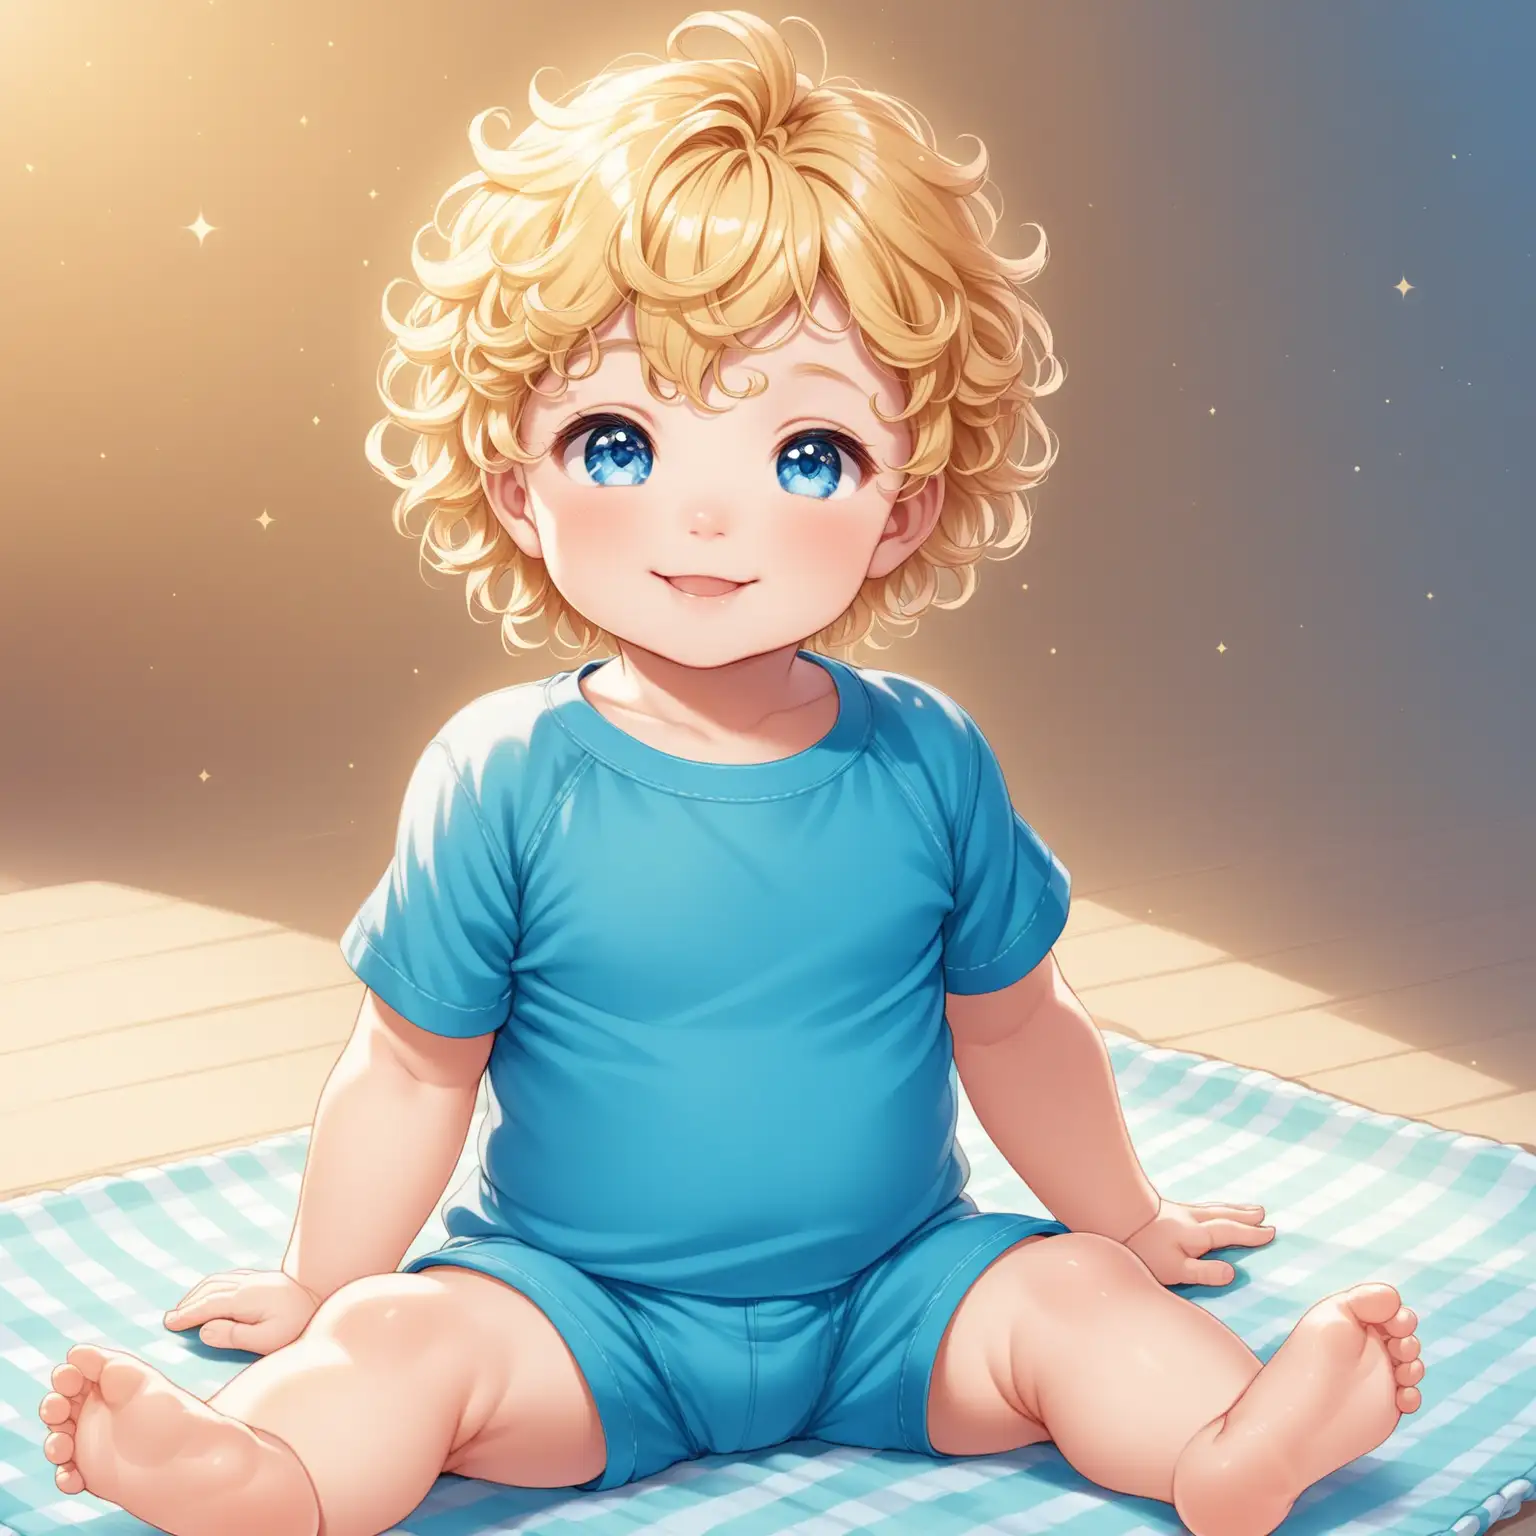 baby boy, big blue eyes, blonde curly hair, smiling, blue outfit, sitting on a blanket, 